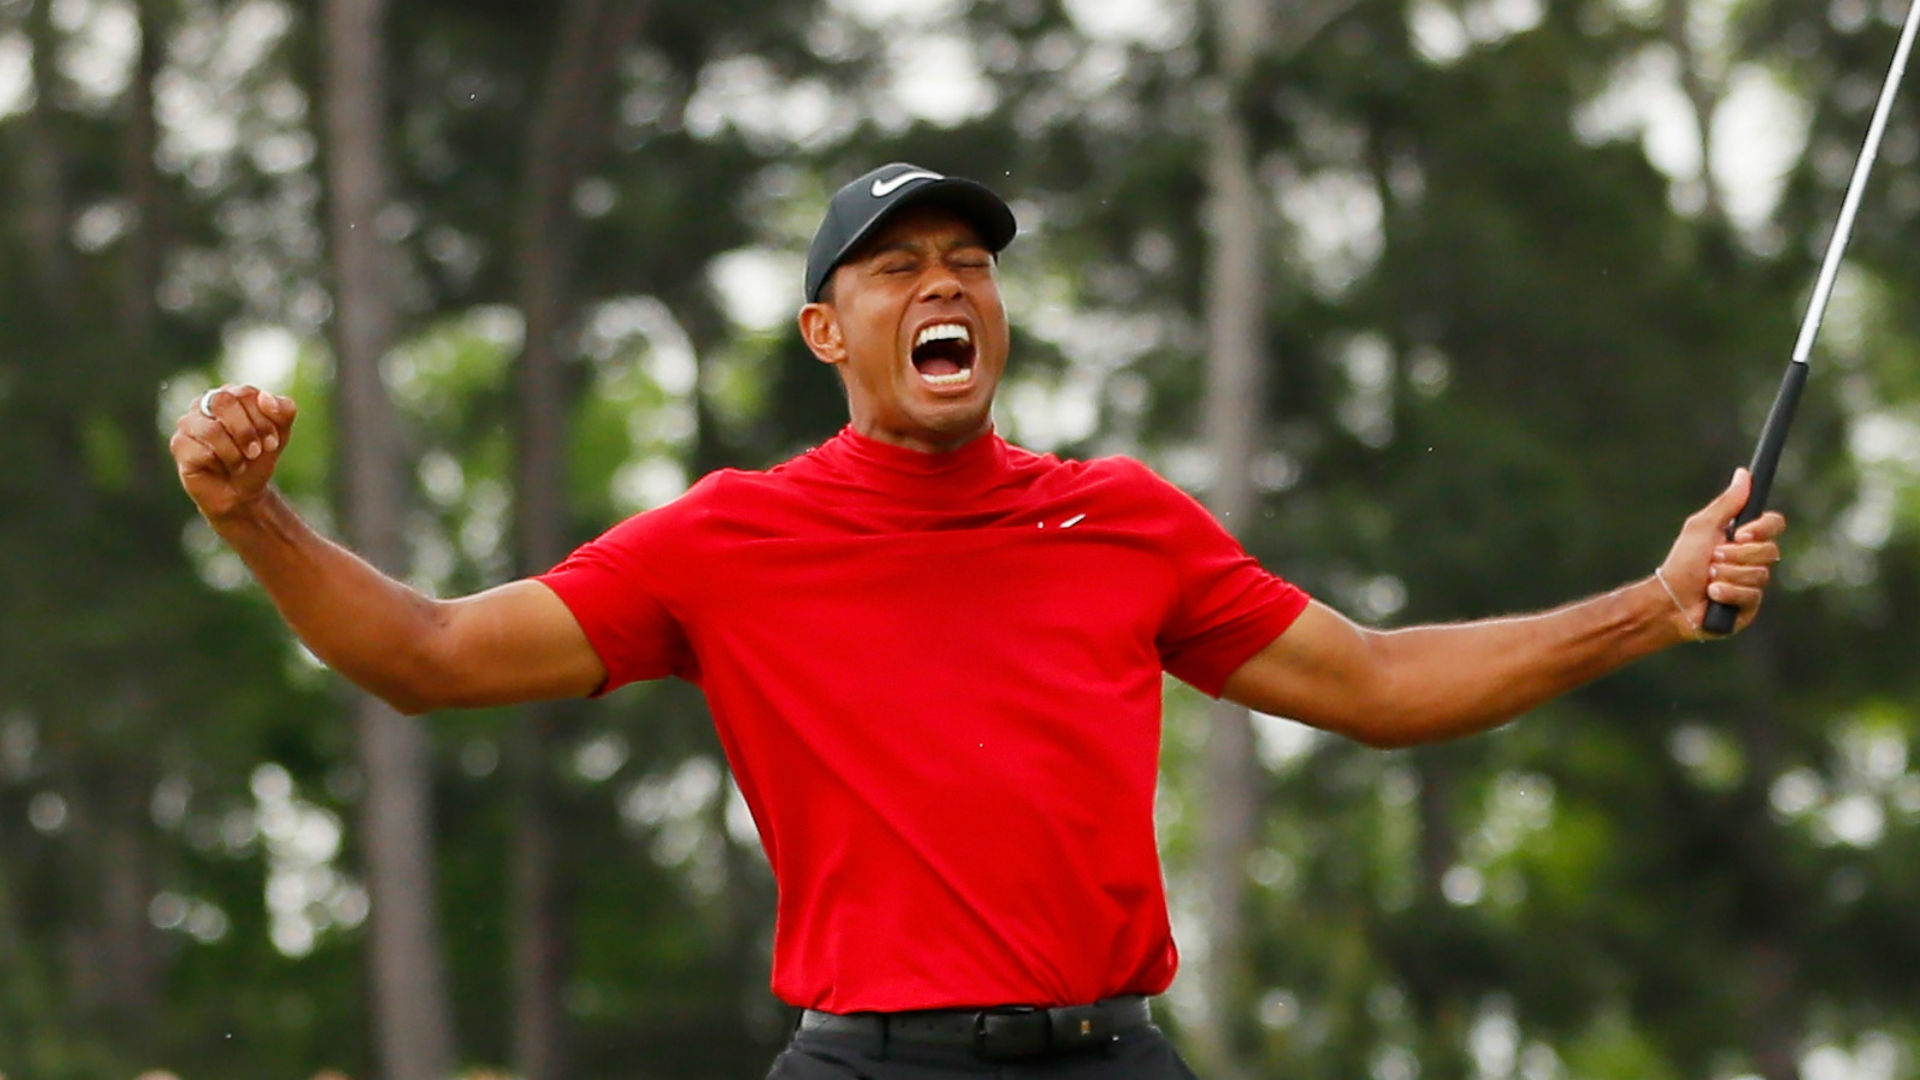 Tiger Woods' Masters triumph provoked an emotional response from Rafael Nadal, who himself battled back from injury to prosper once more.